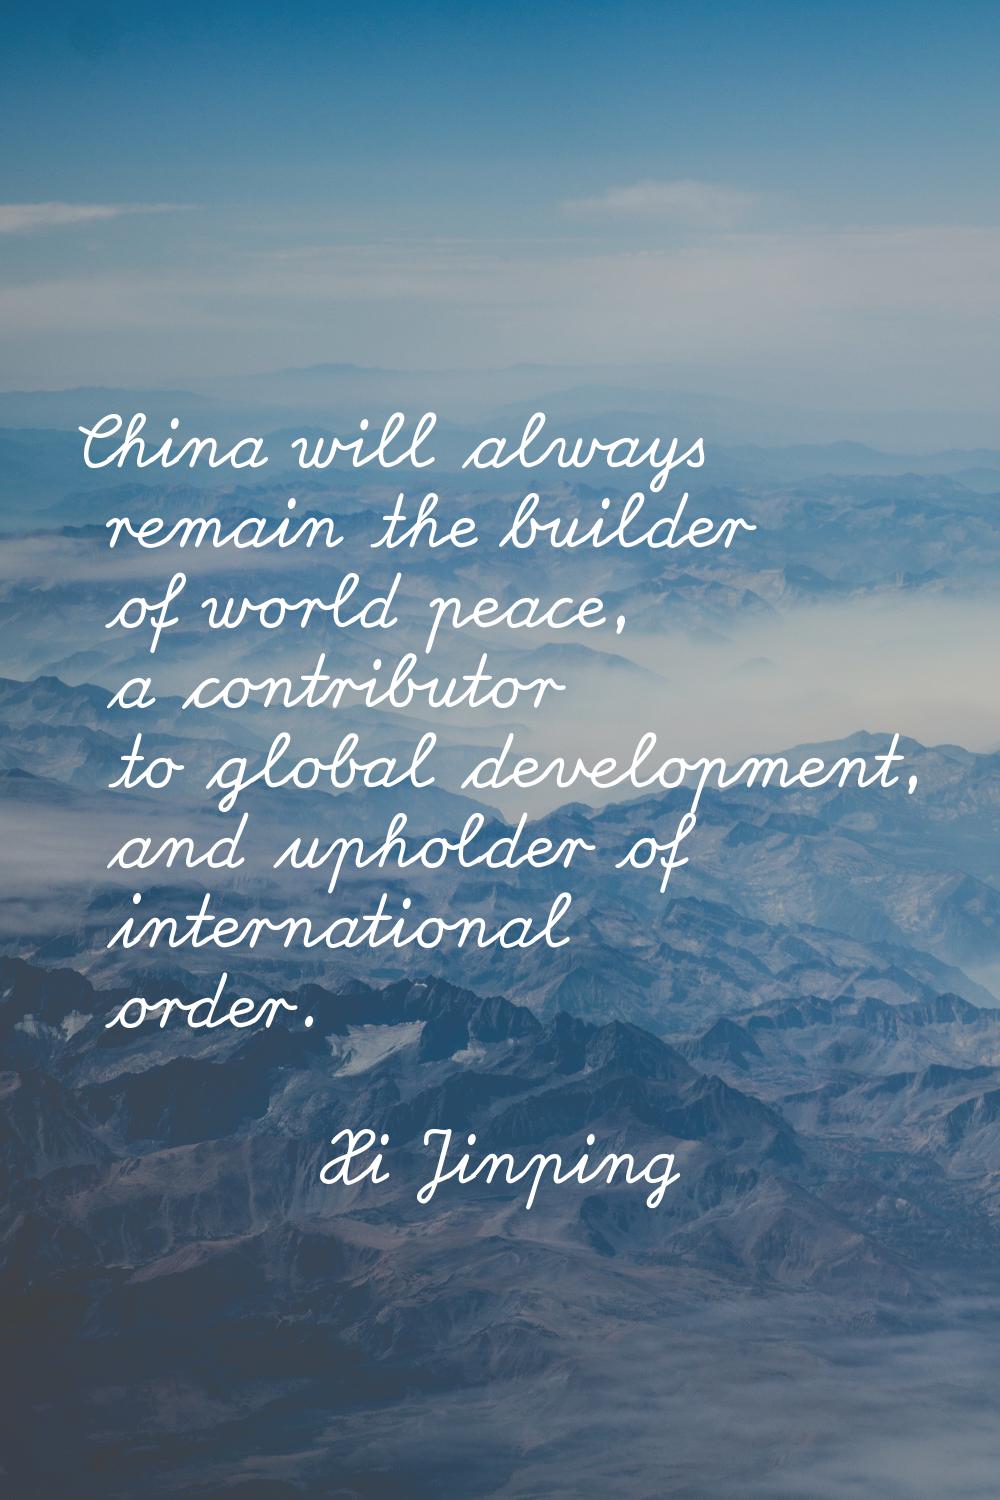 China will always remain the builder of world peace, a contributor to global development, and uphol